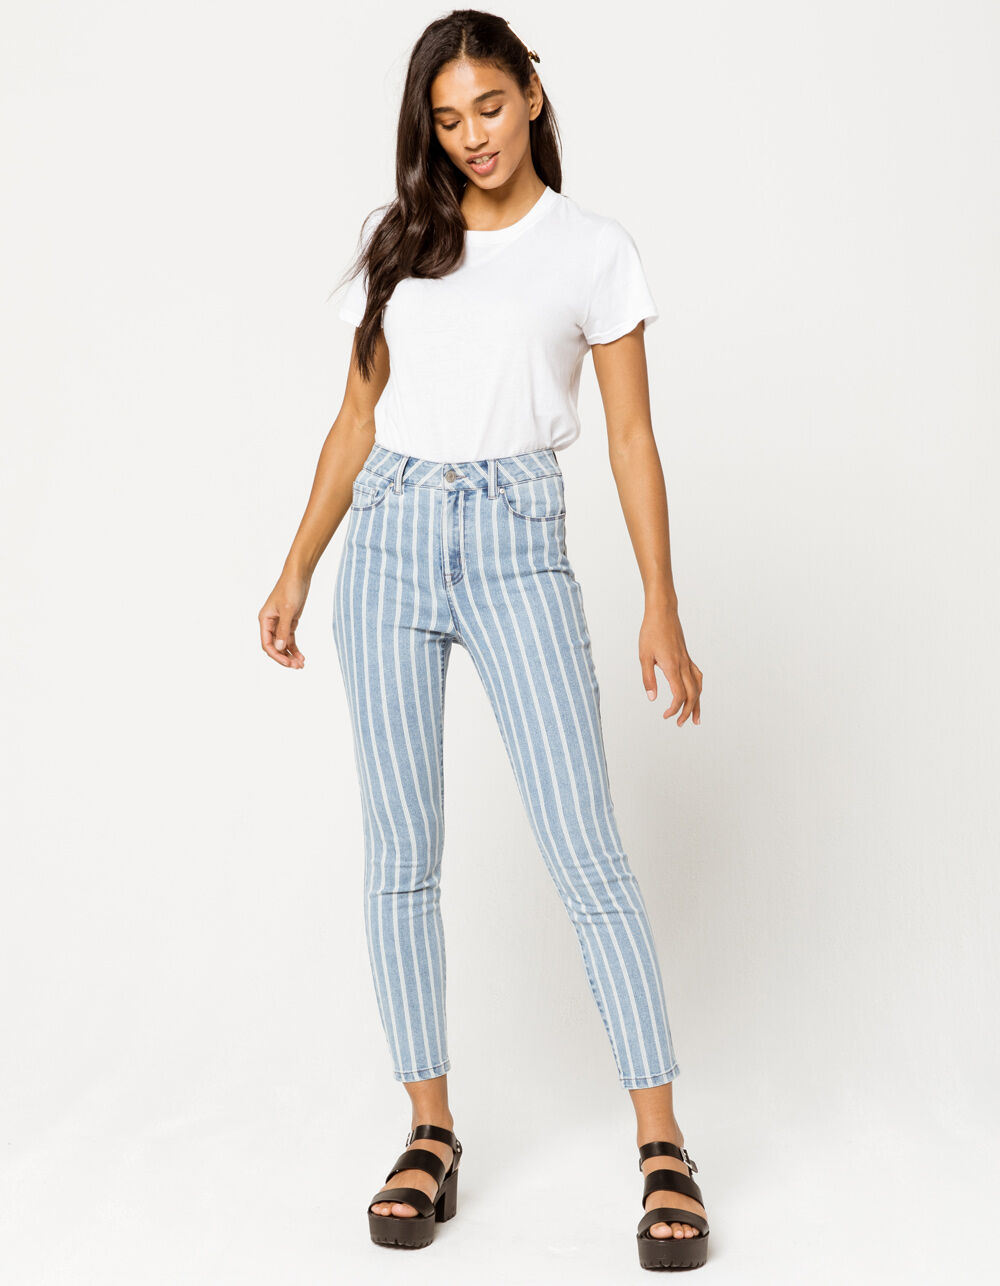 SKY AND SPARROW Stripe Skinny Crop Womens Jeans image number 0